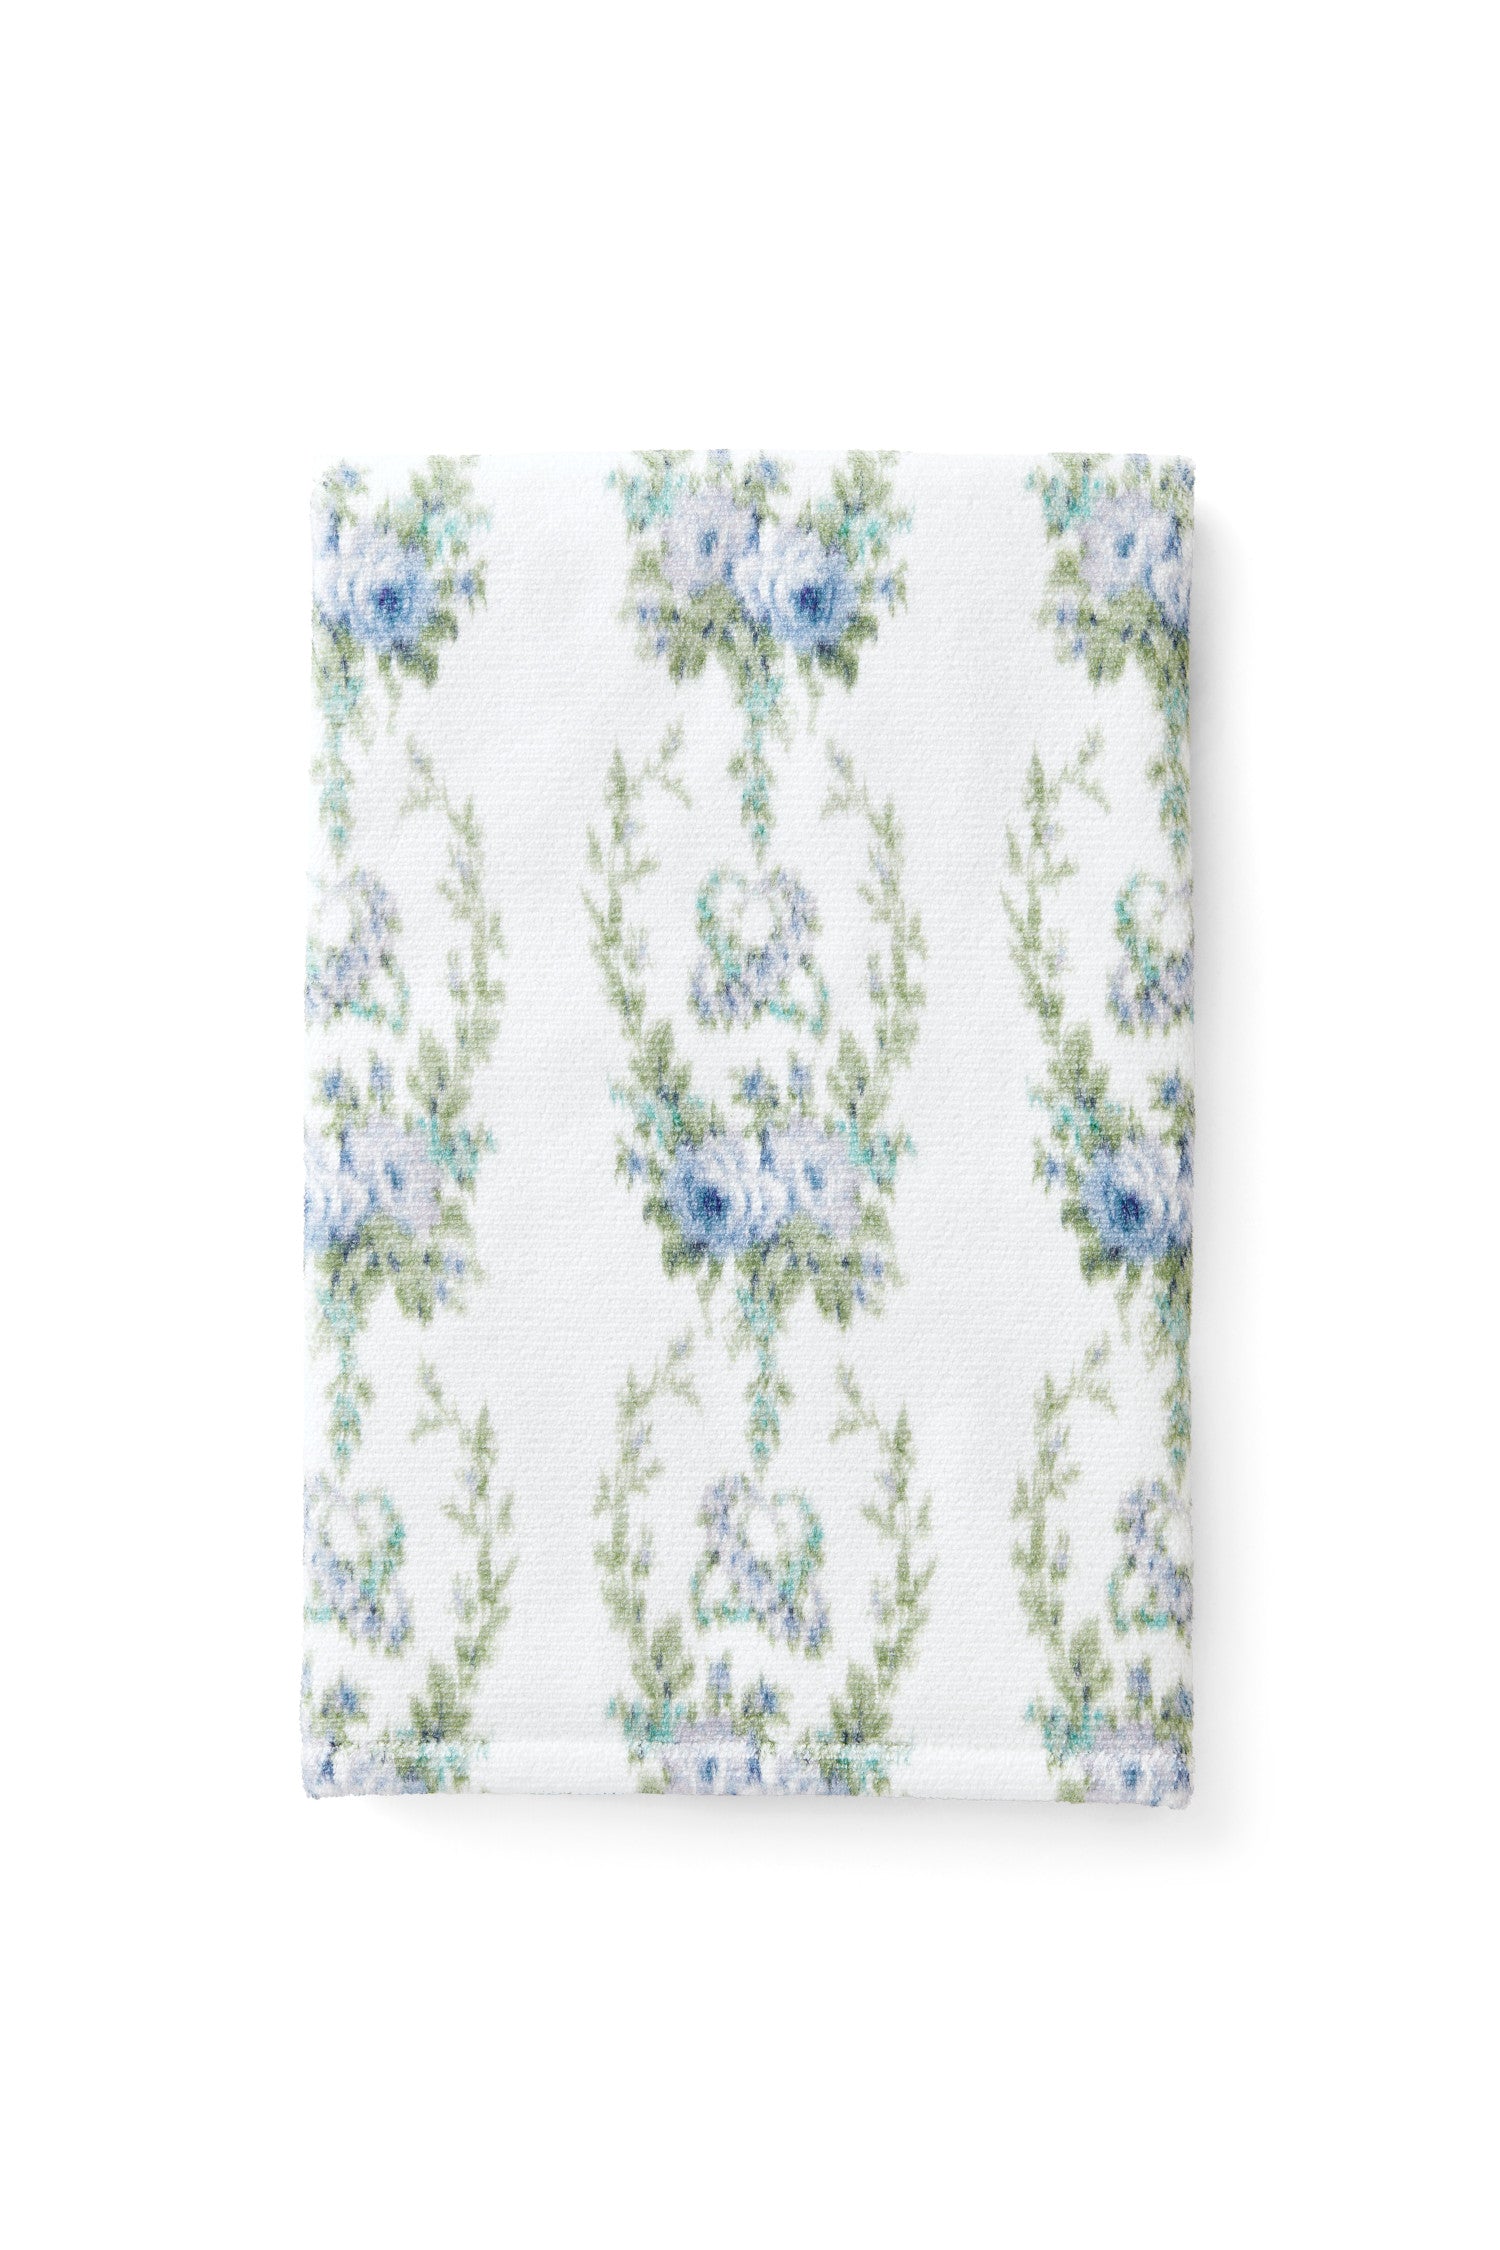 vintage-inspired repeating floral print hand towel in a soft blue against a white back